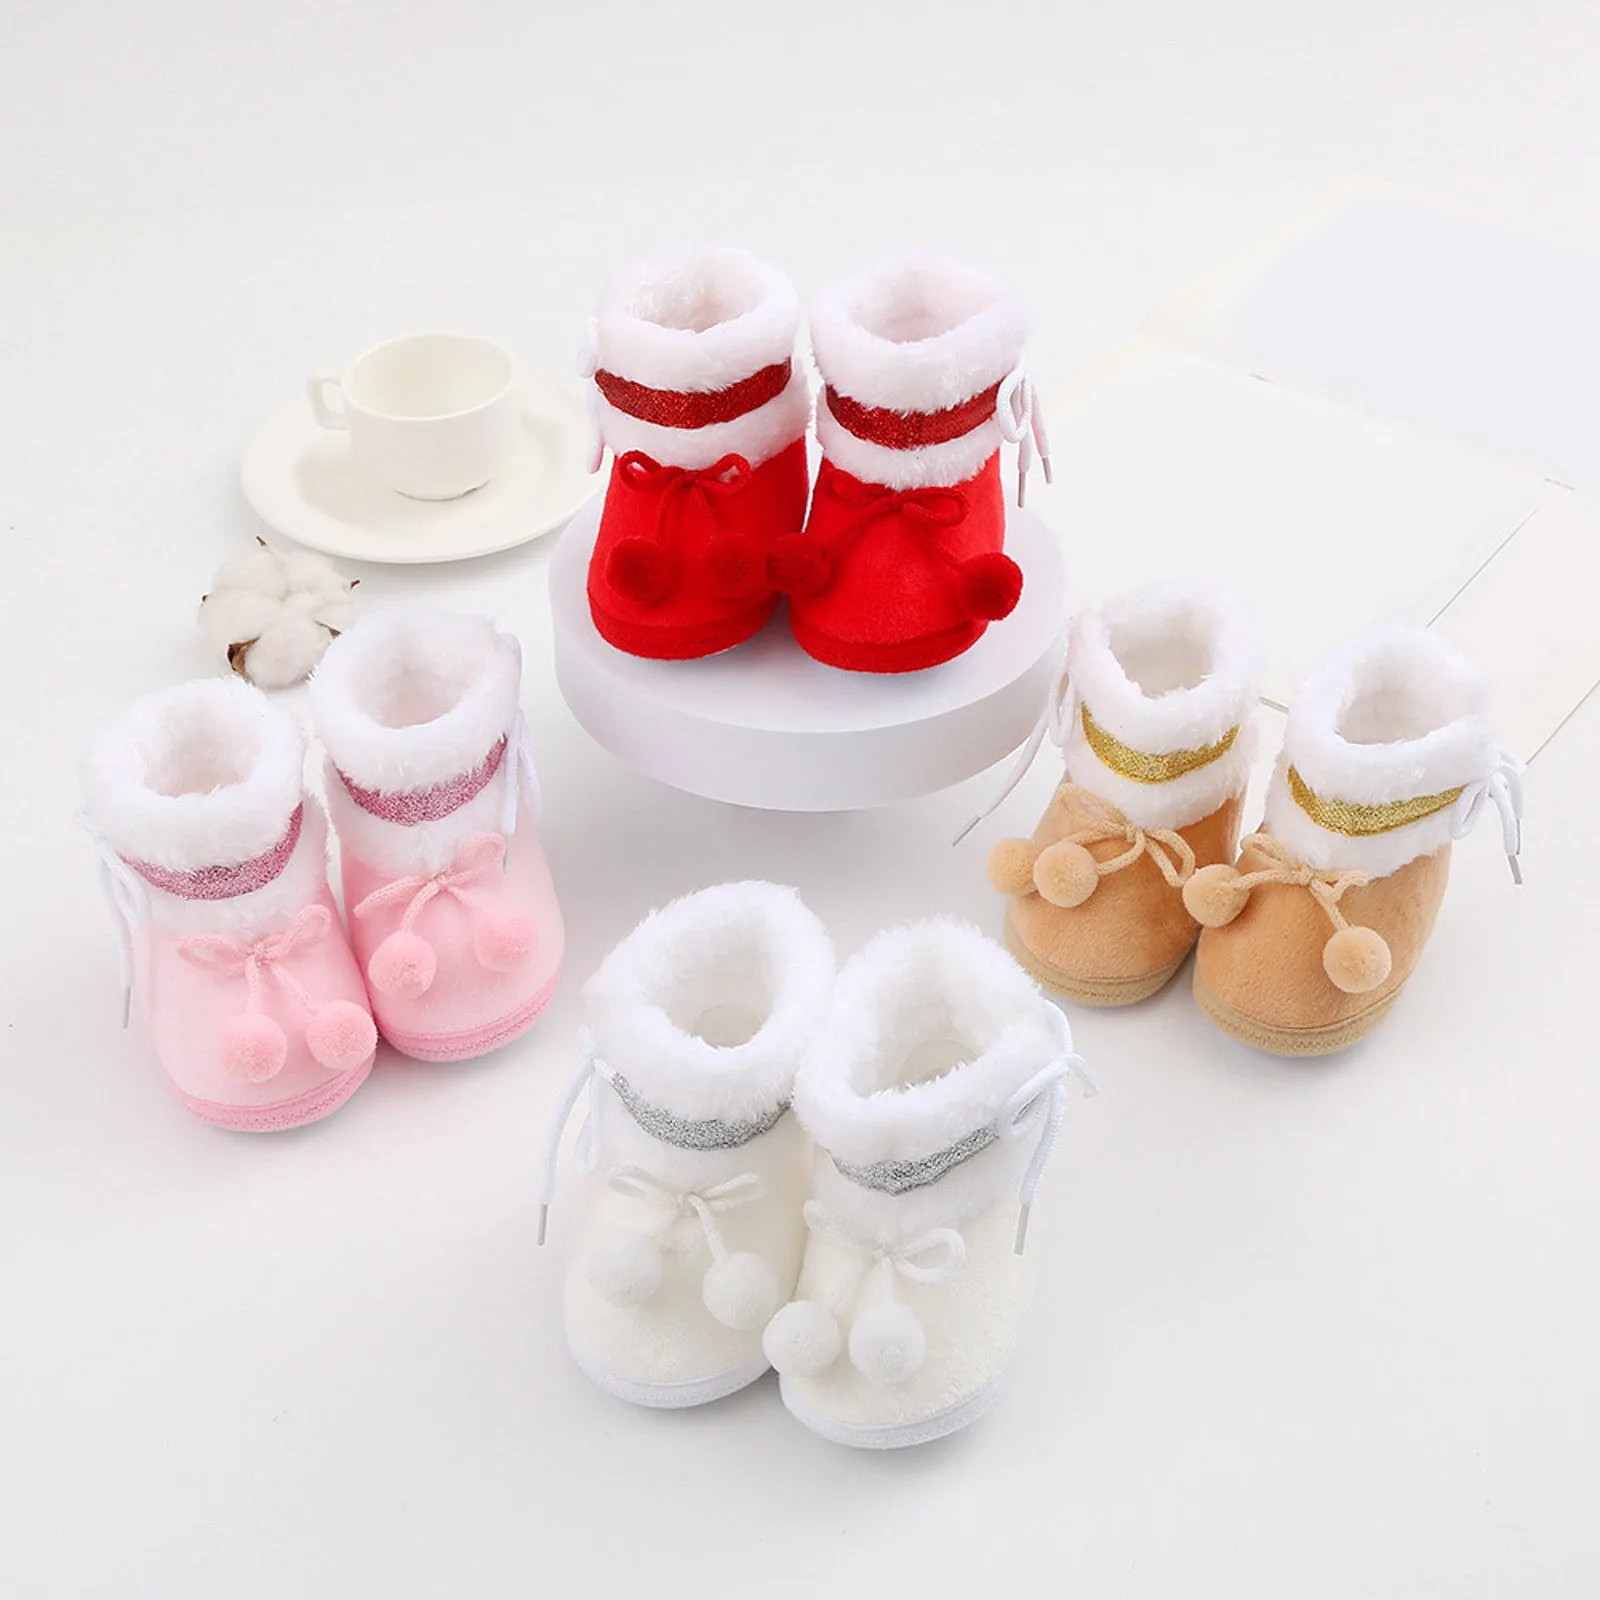 Baby Girl Flat Warm Pink-Red Booties